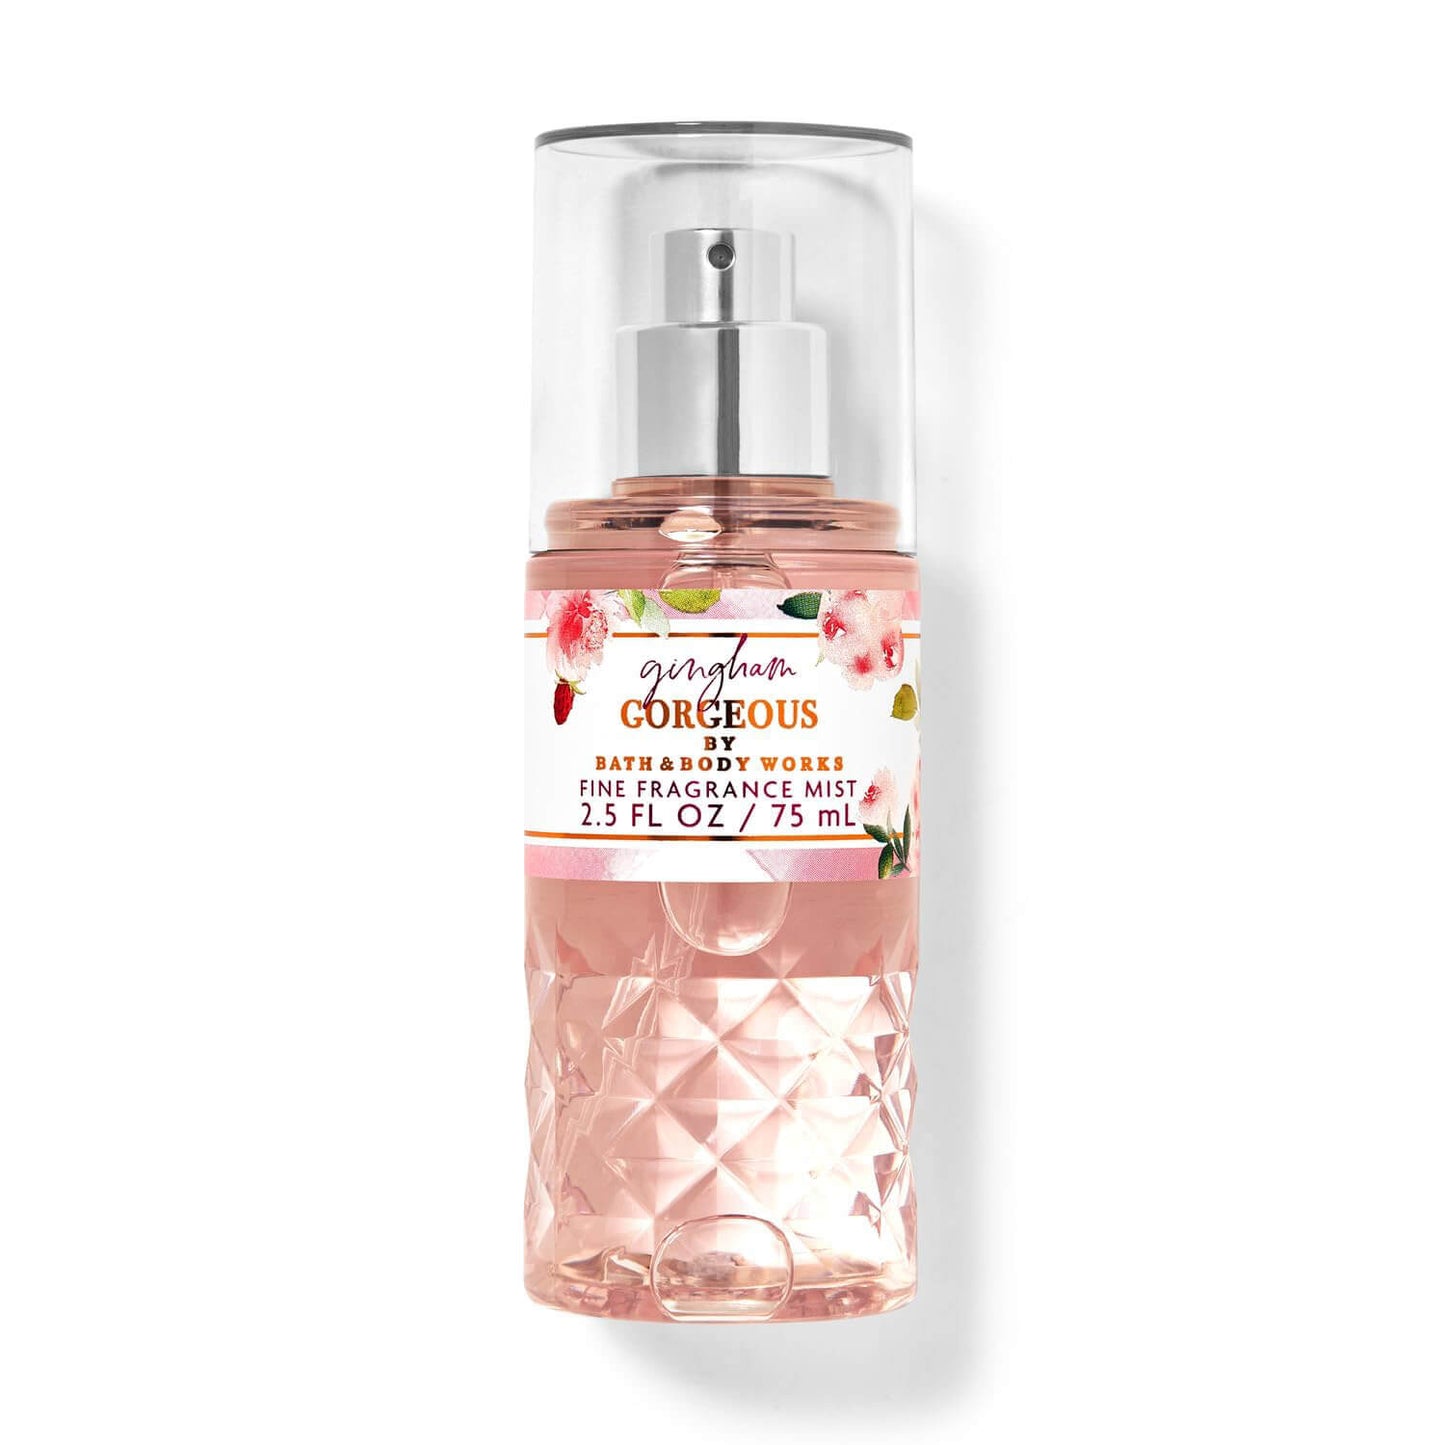 shop bath and body travel mist in gingham gorgeous fragrance available at Heygirl.pk for delivery in Pakistan